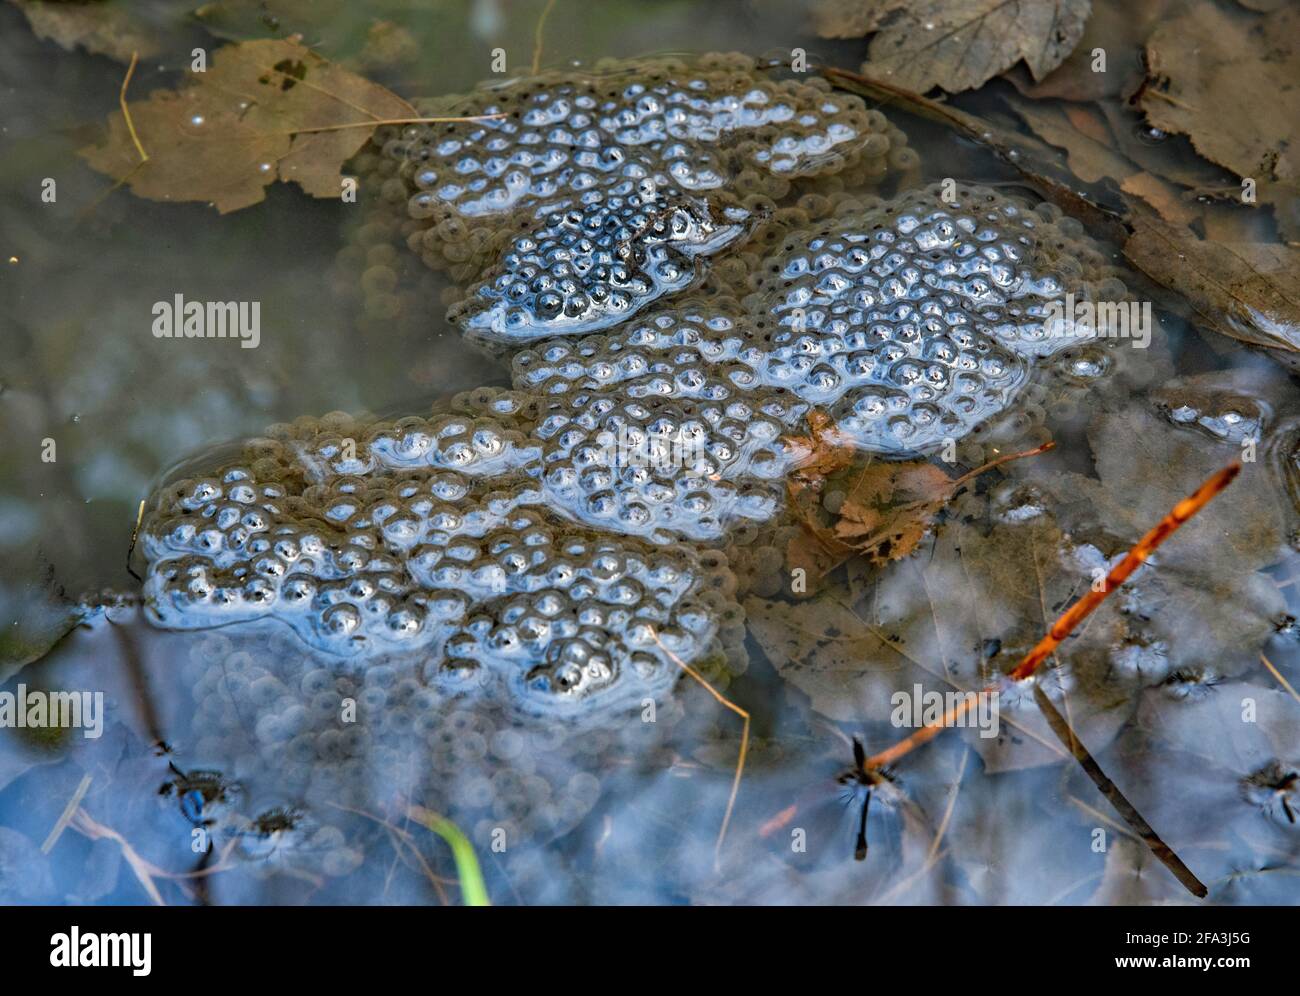 A frog spawn in the waters. Eggs in a clump about to hatch into tadpoles. Stock Photo